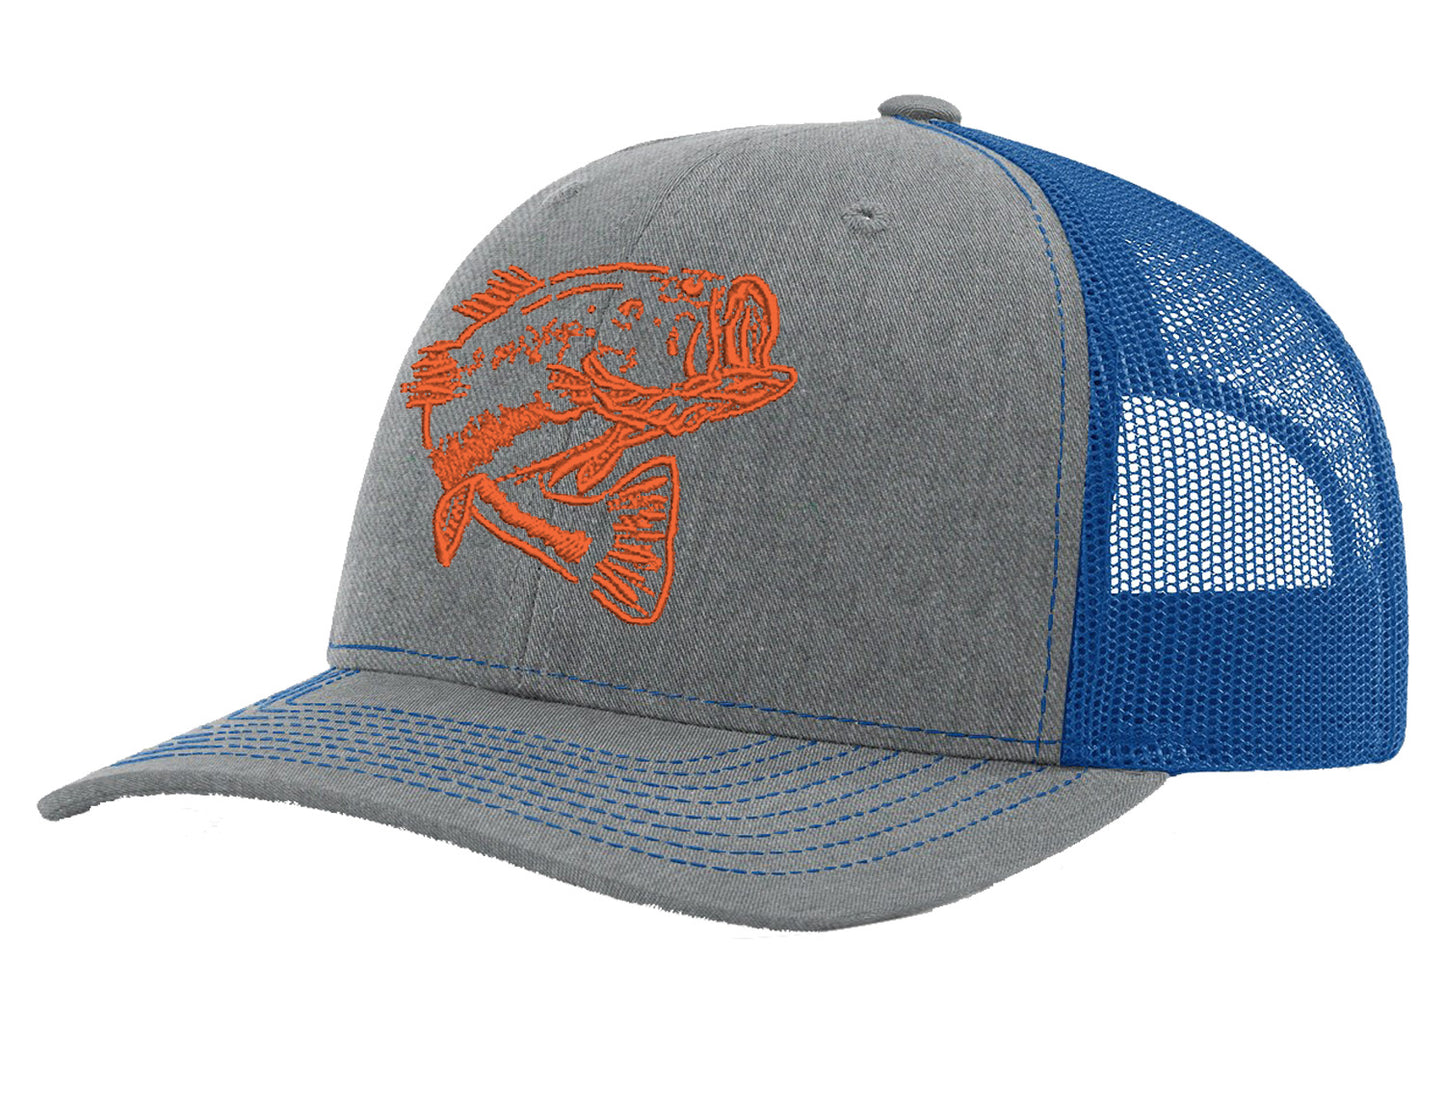 Bass Fishing Reel Hawg Structured Trucker Hats - *22 Colors! Hthr Gray/Royal - Orange Bass